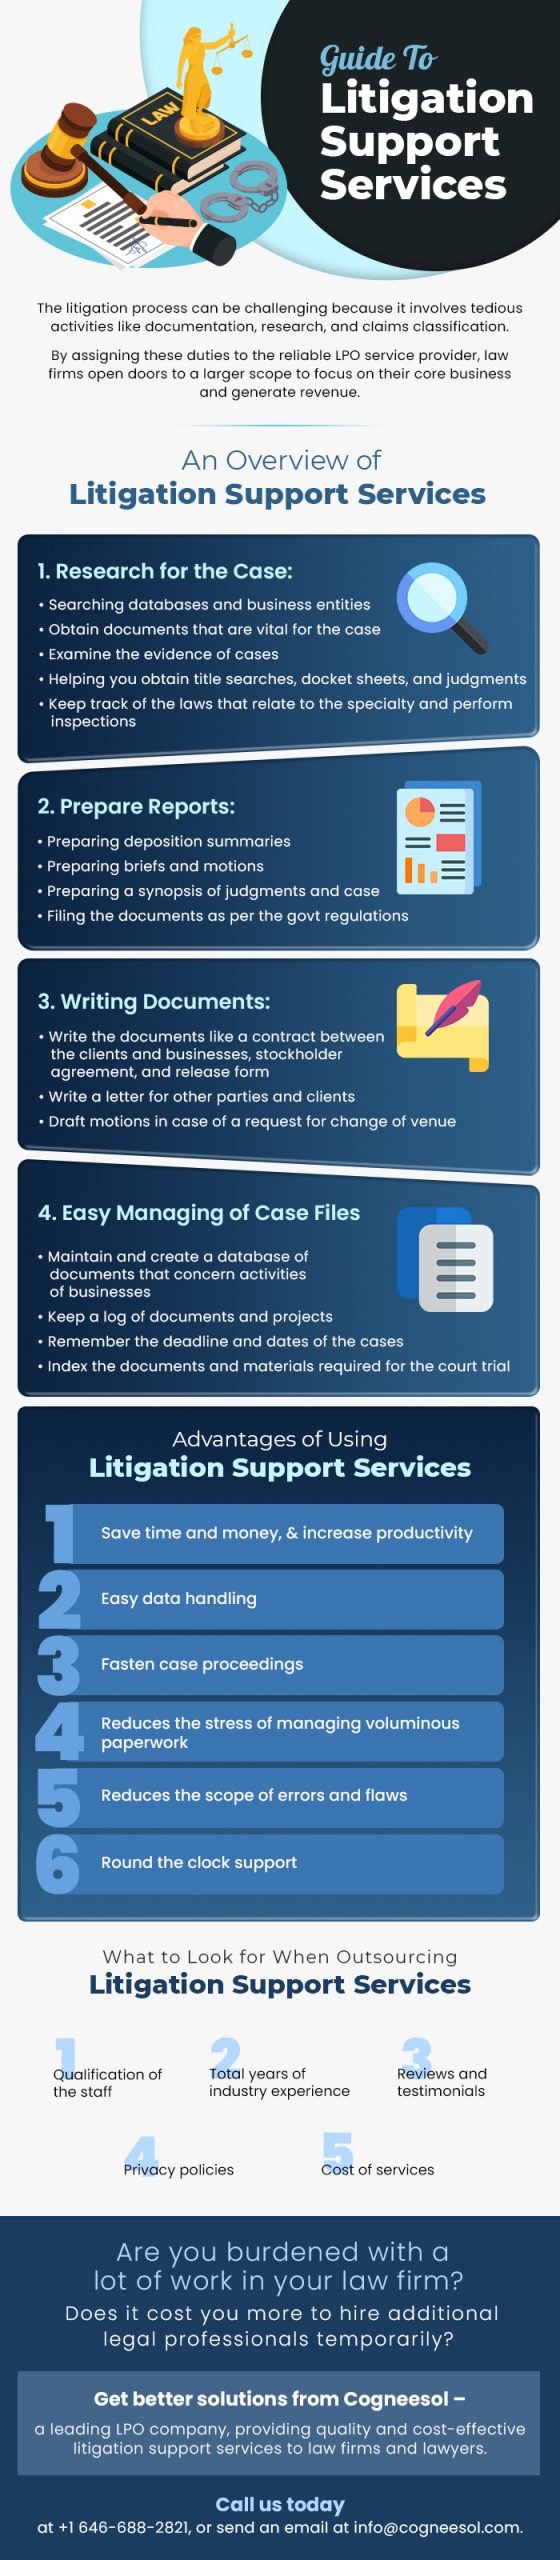 Guide to Litigation support services